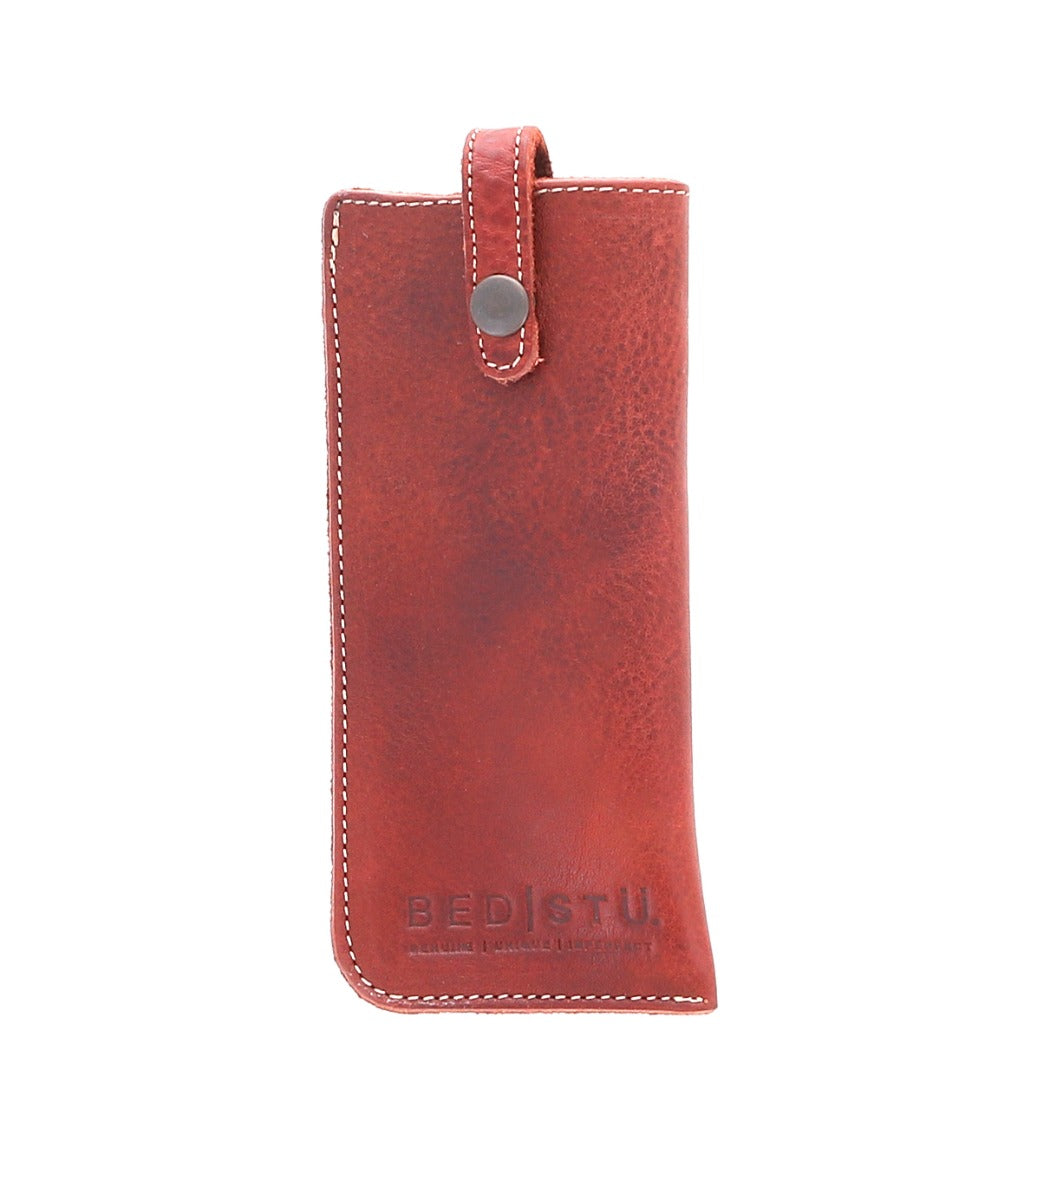 A Behold phone case with a metal clasp. Brand Name: Bed Stu